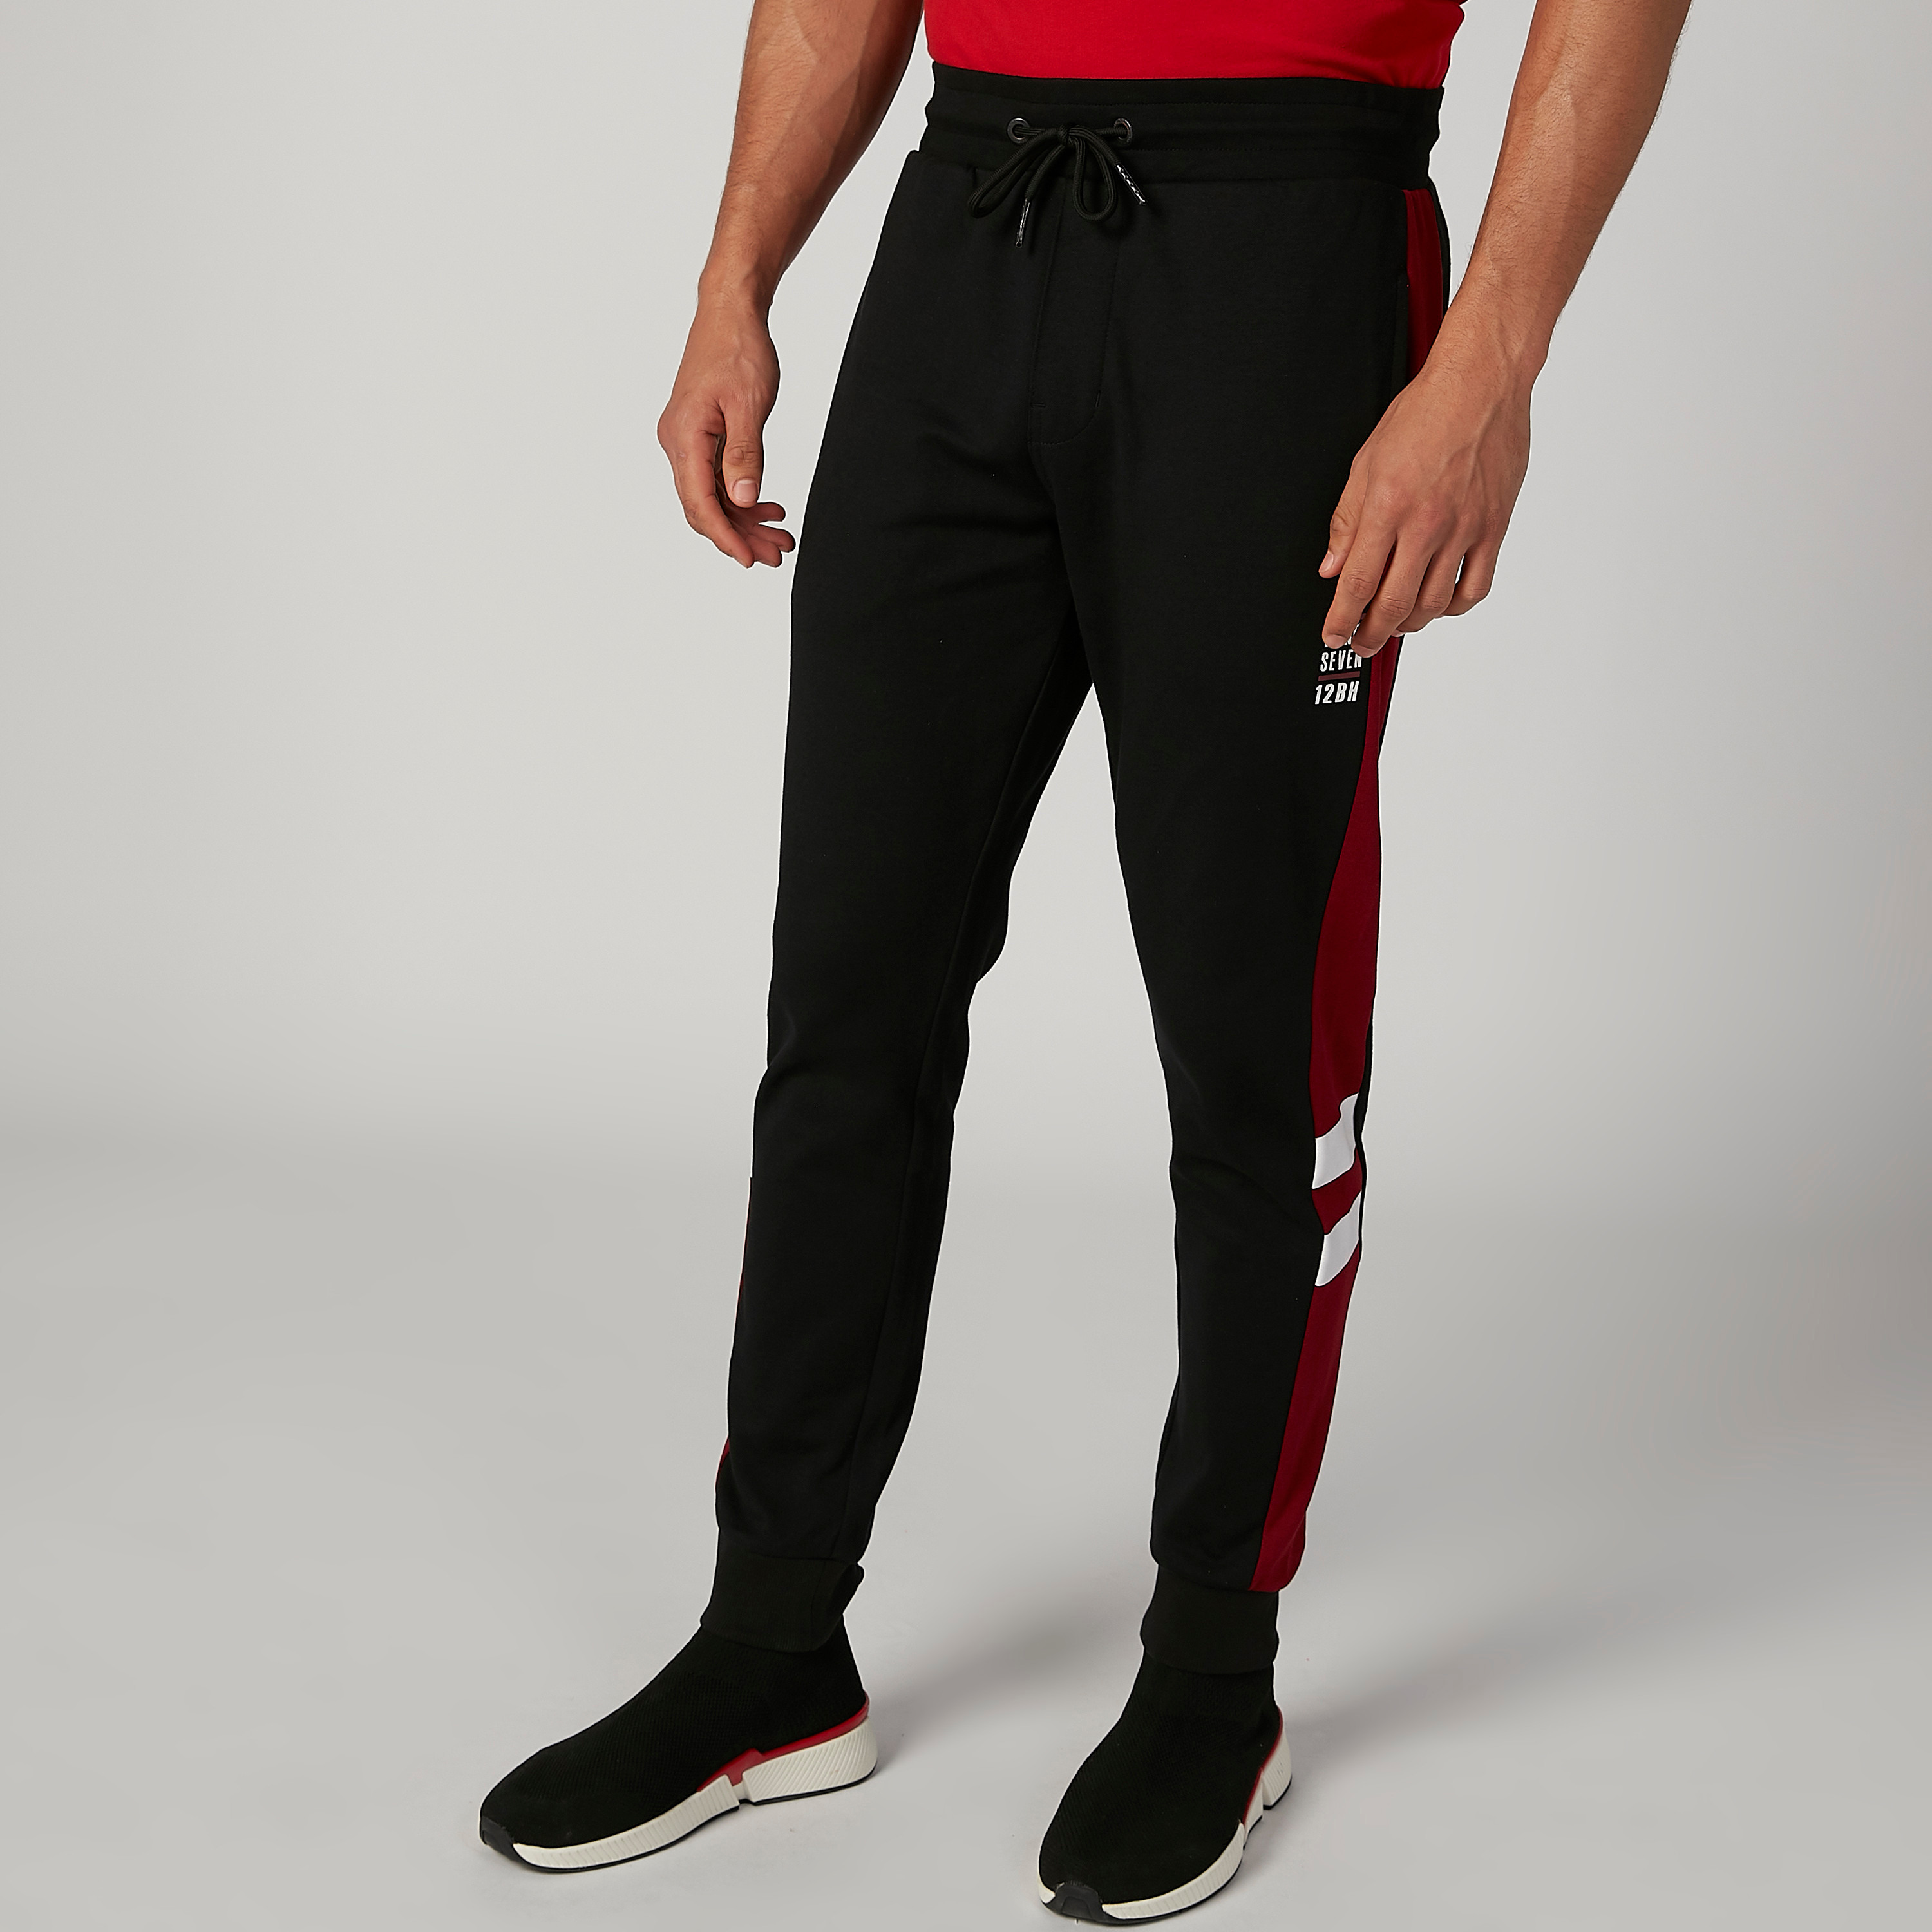 Buy Being Human Men Brick Red Cargo Trousers - Trousers for Men 209426 |  Myntra